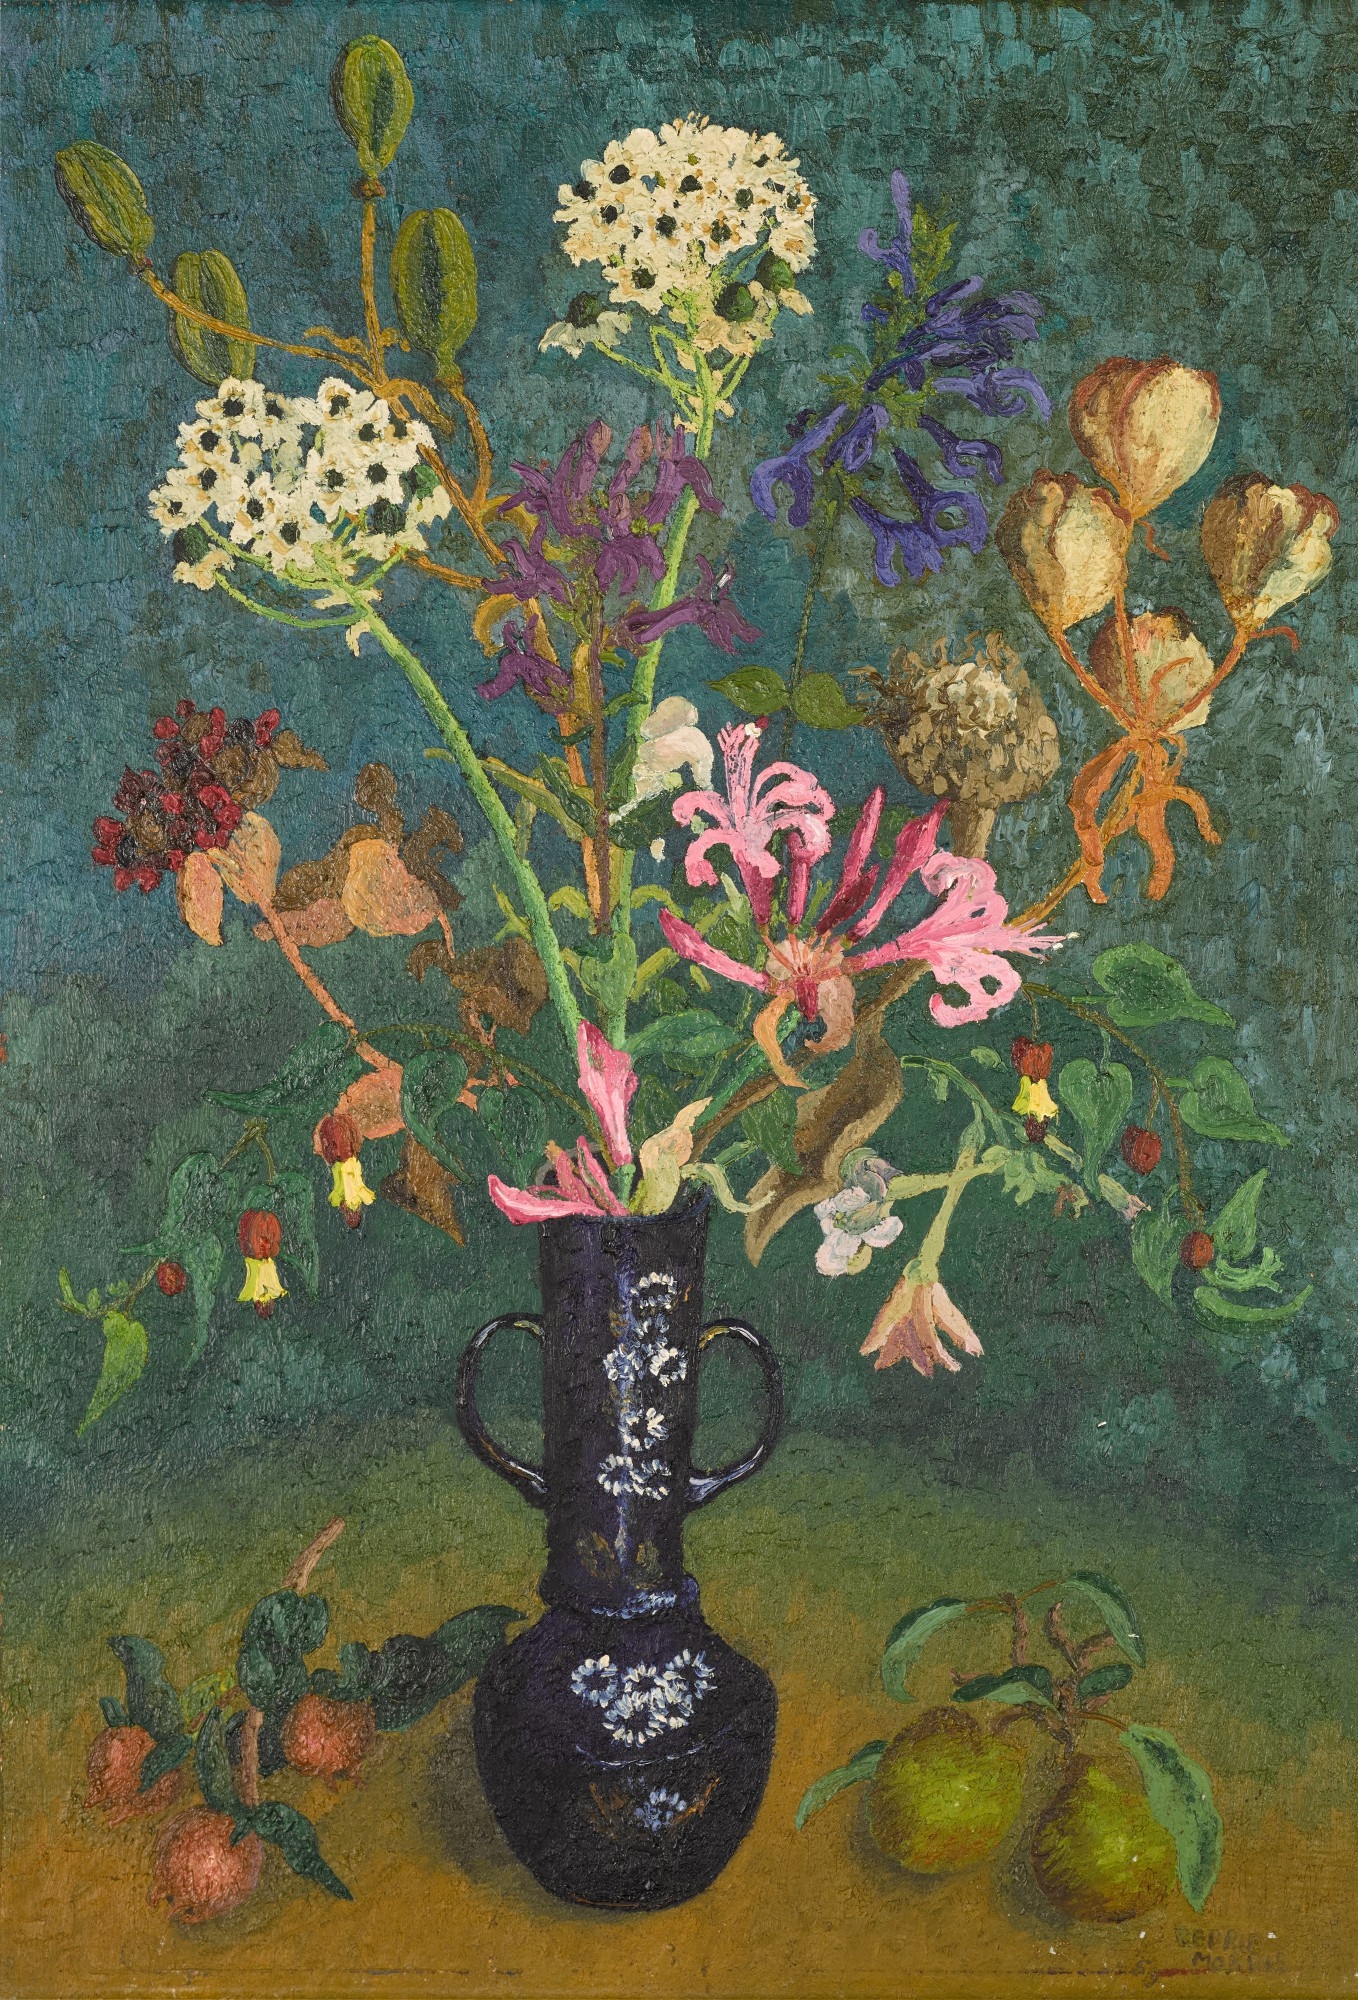 Winter Flowers by Sir Cedric Morris, Executed in circa 1966